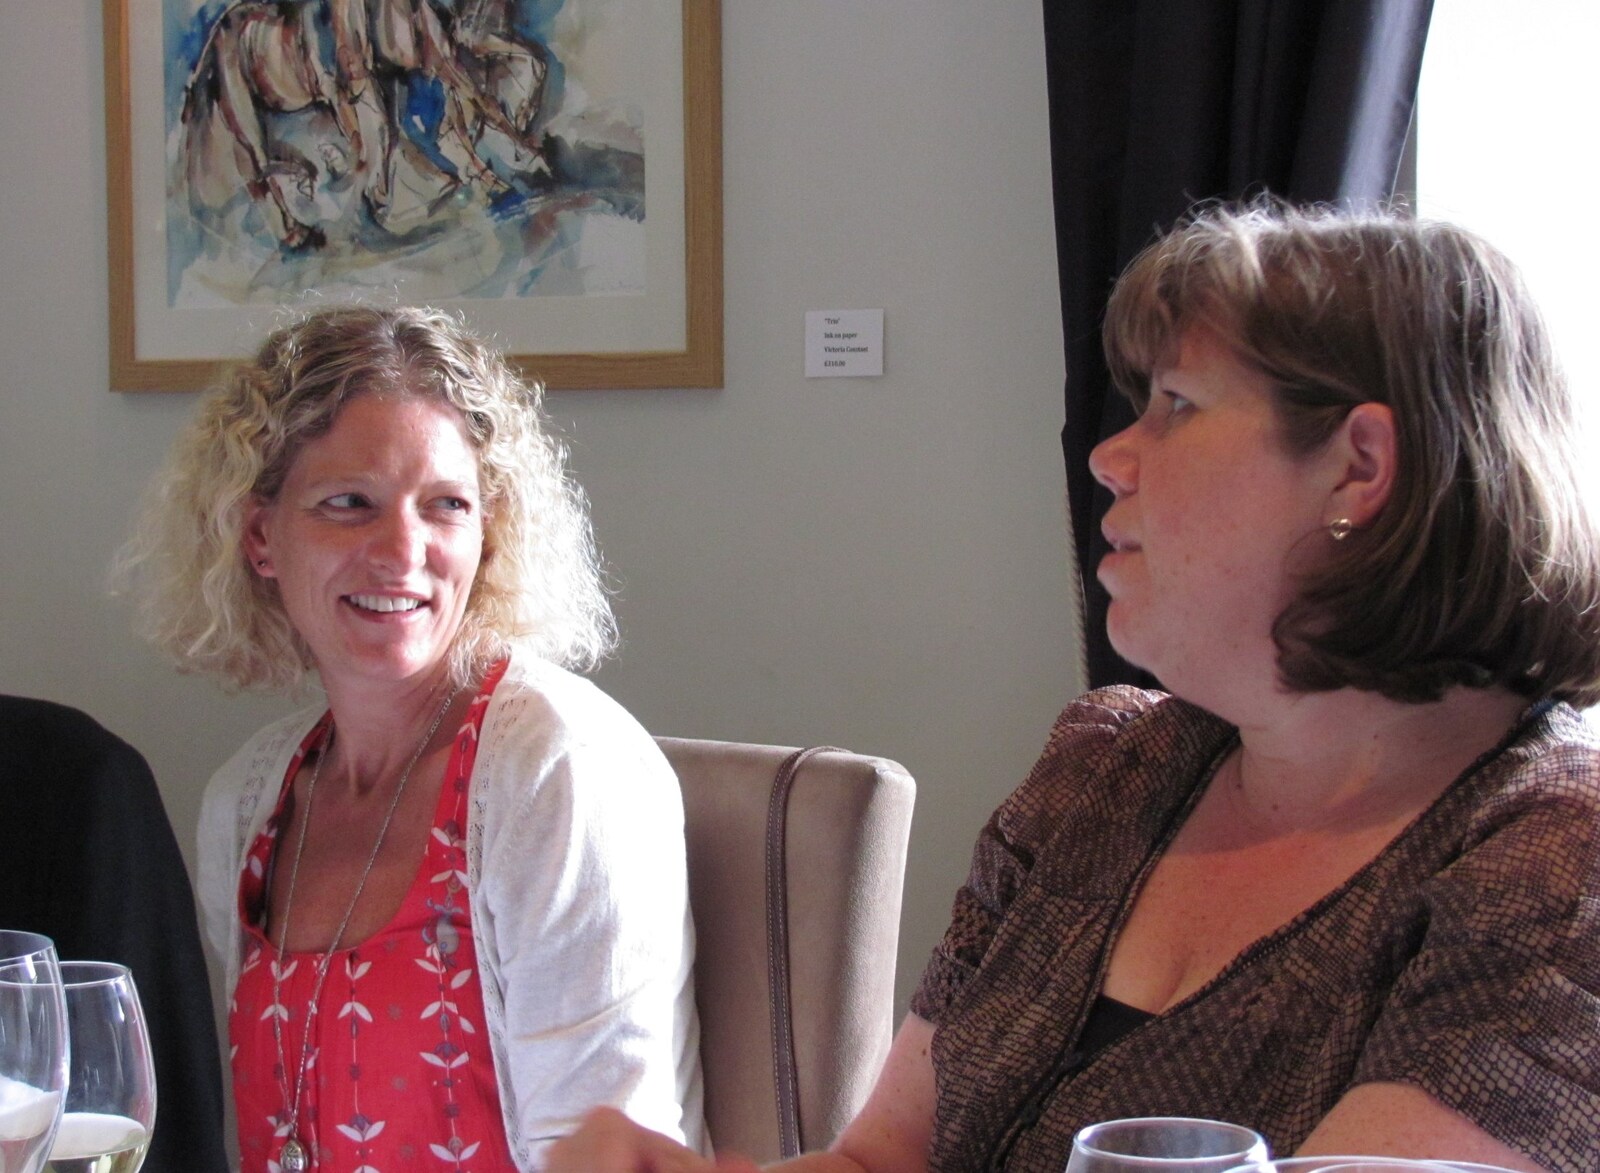 Kim and Sis from Mike's Memorial, Prince Hall Hotel, Two Bridges, Dartmoor - 12th July 2011